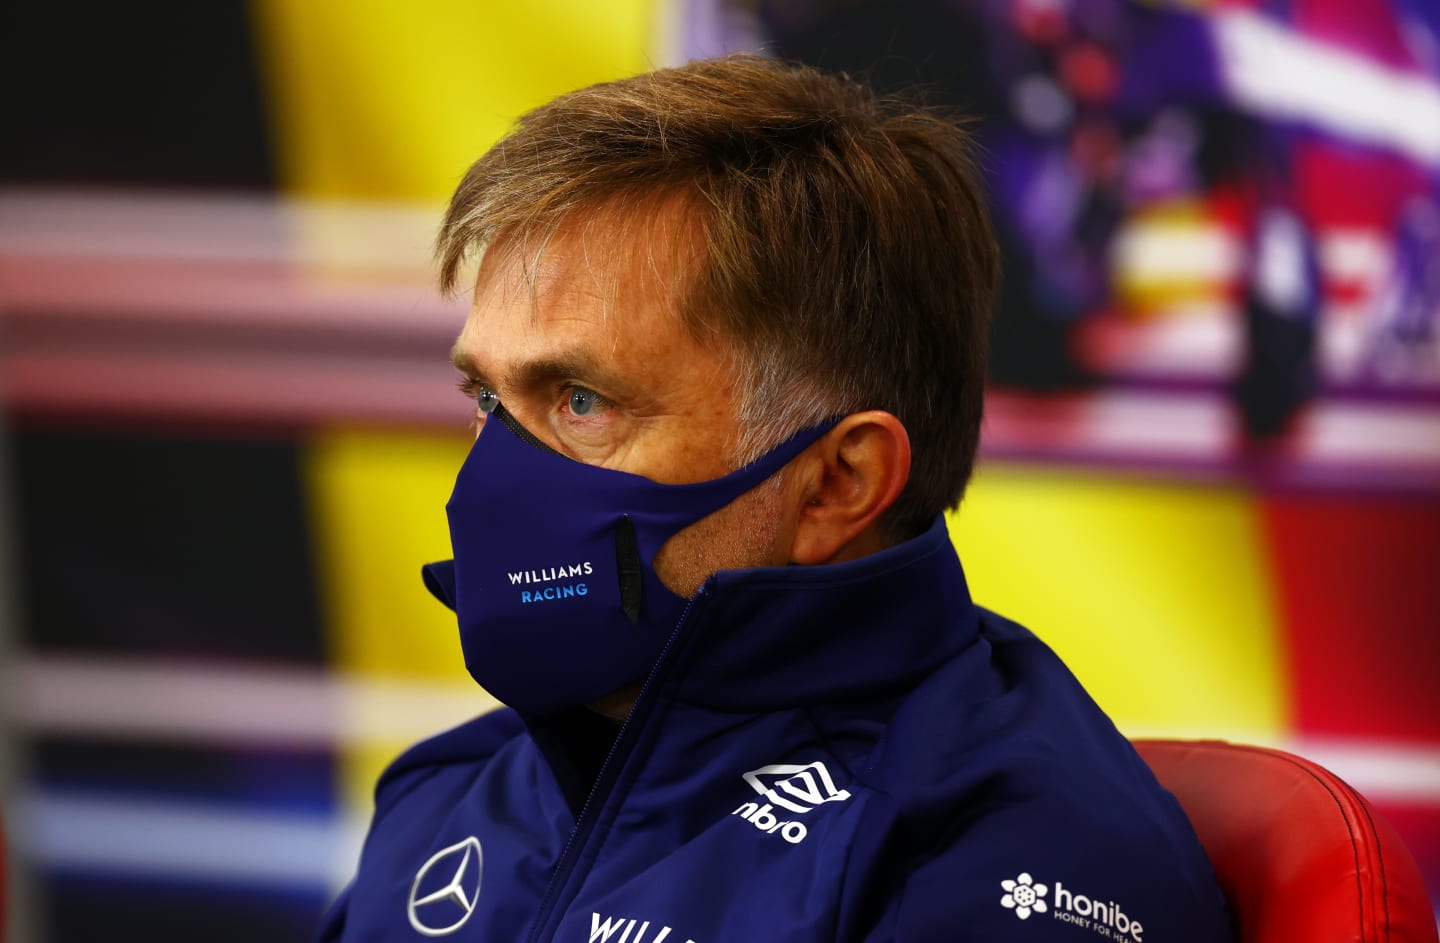 SPA, BELGIUM - AUGUST 27: Jost Capito, CEO of Williams F1 talks in the Team Principals Press Conference during practice ahead of the F1 Grand Prix of Belgium at Circuit de Spa-Francorchamps on August 27, 2021 in Spa, Belgium. (Photo by Dan Istitene/Getty Images)